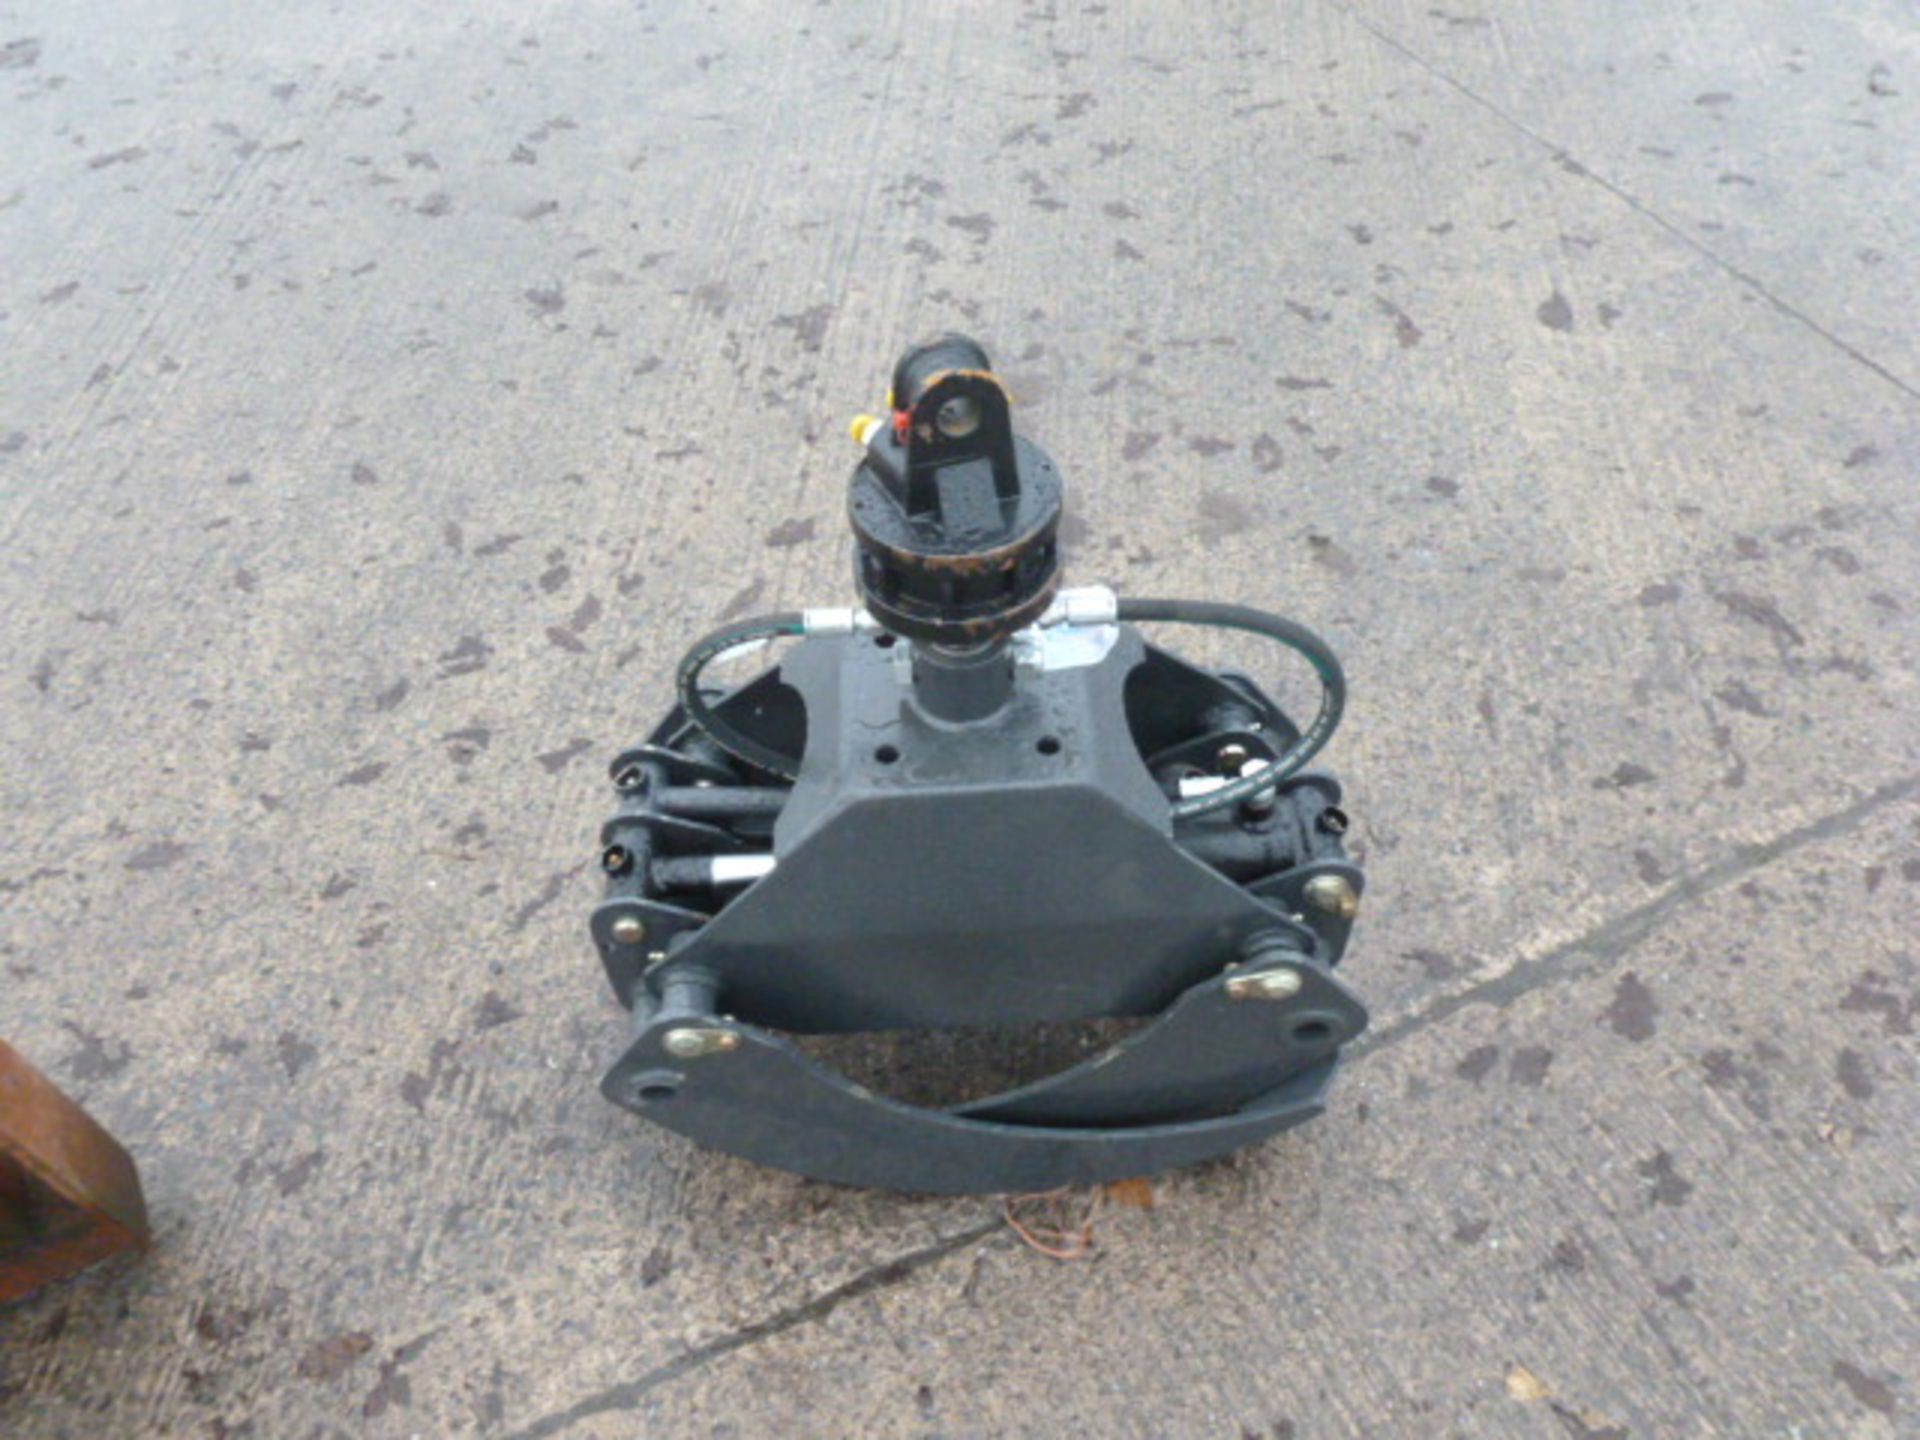 LOG GRAPPLE TO SUIT A MINI DIGGER C/W HYDRAULIC ROTATOR (NEW)